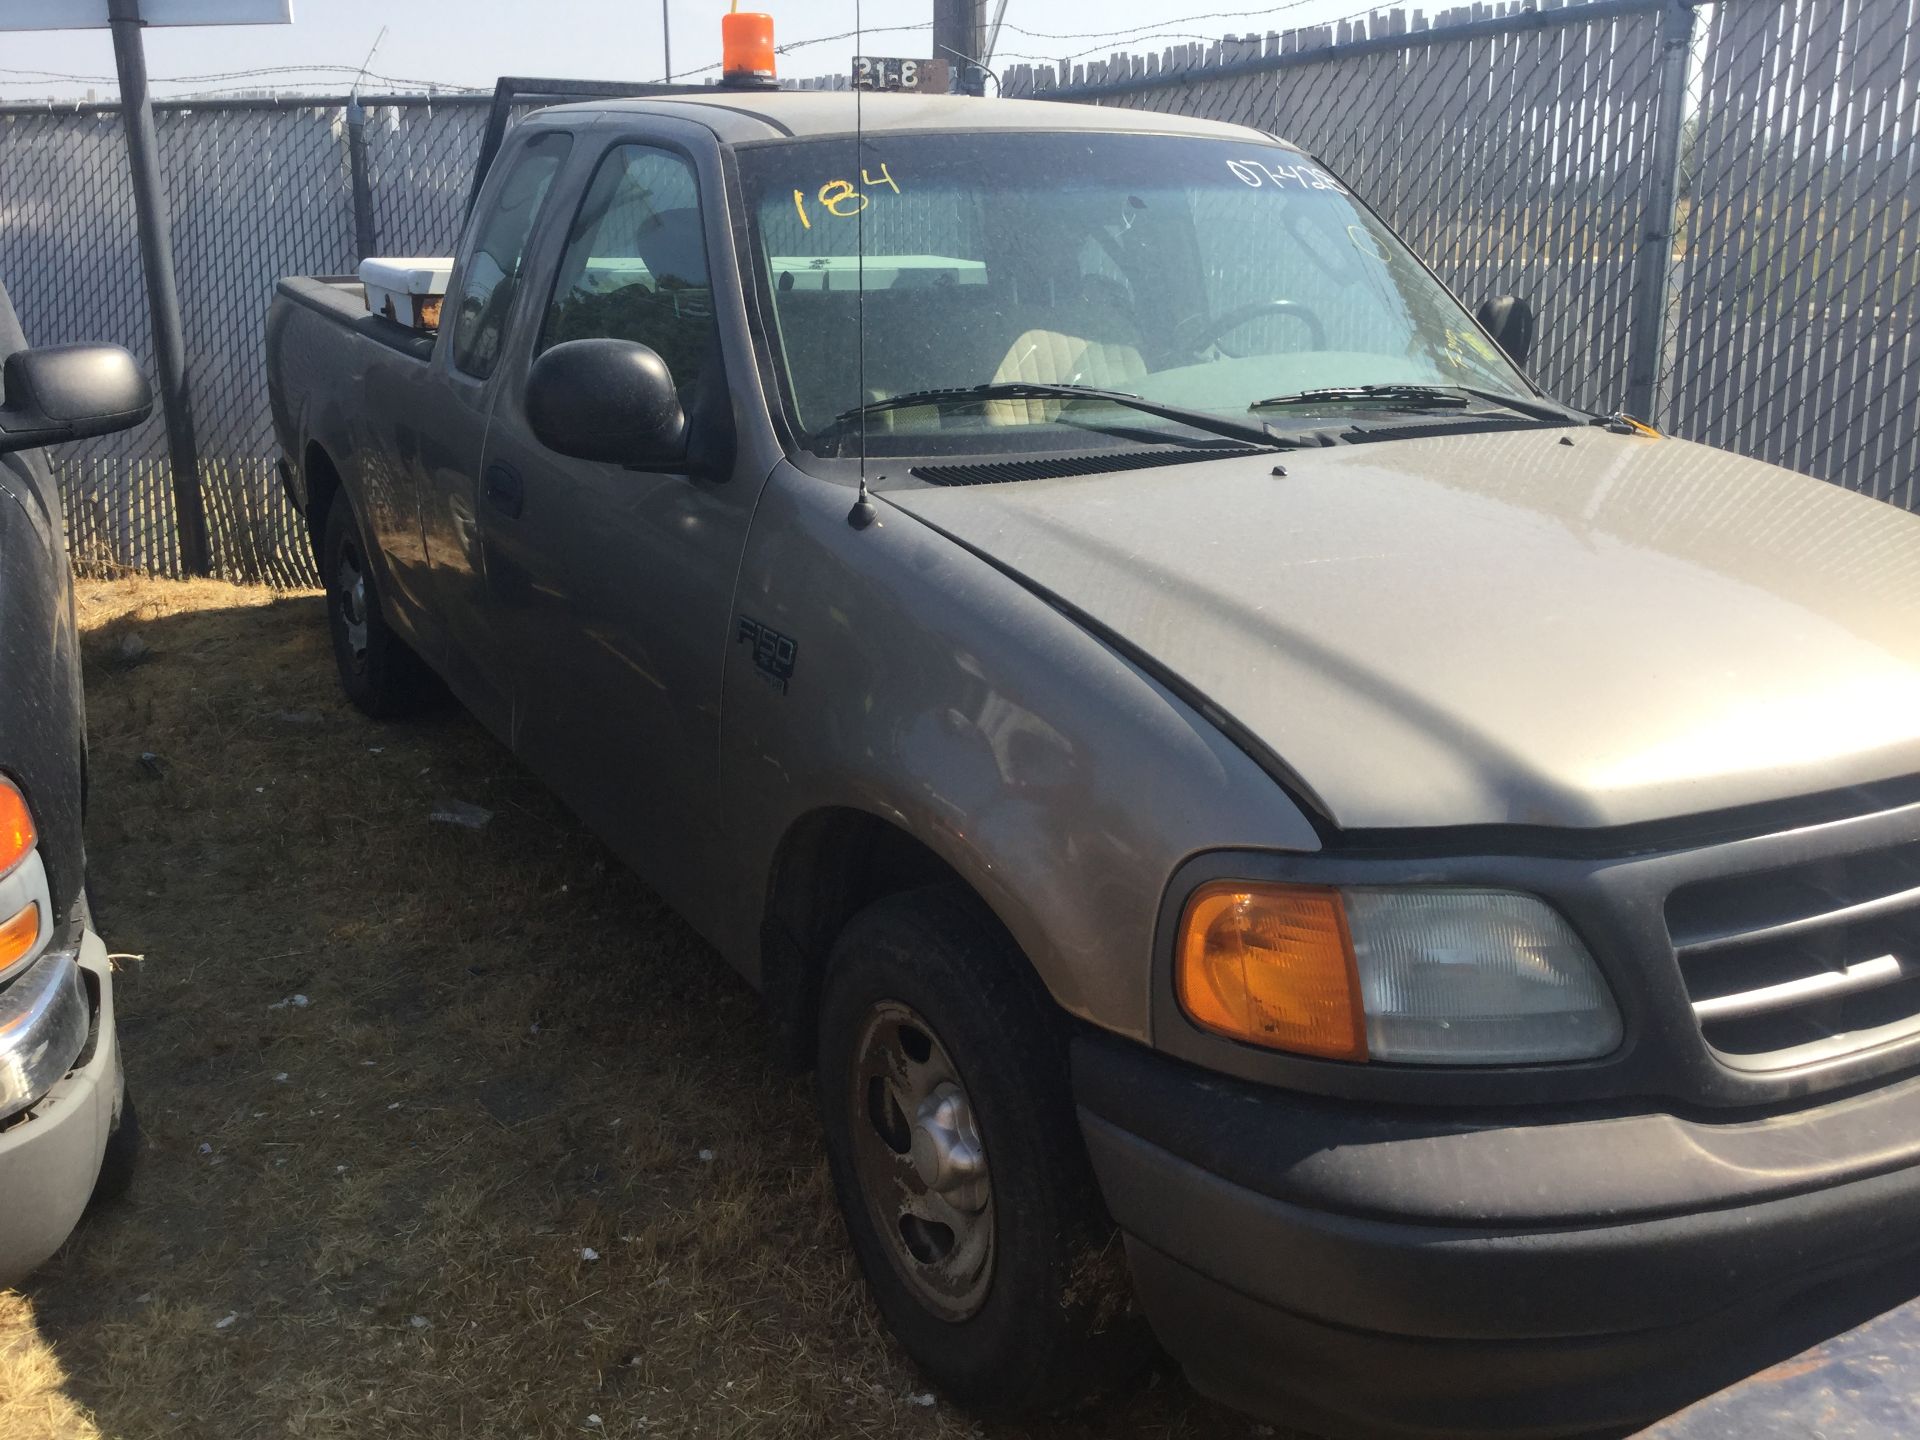 Year: 2004 Make: Ford Model: 1/2T Type: Pickup Vin#: A42398 Mileage/Hours: 239486 4.36L, 2WD, XC, - Image 3 of 4